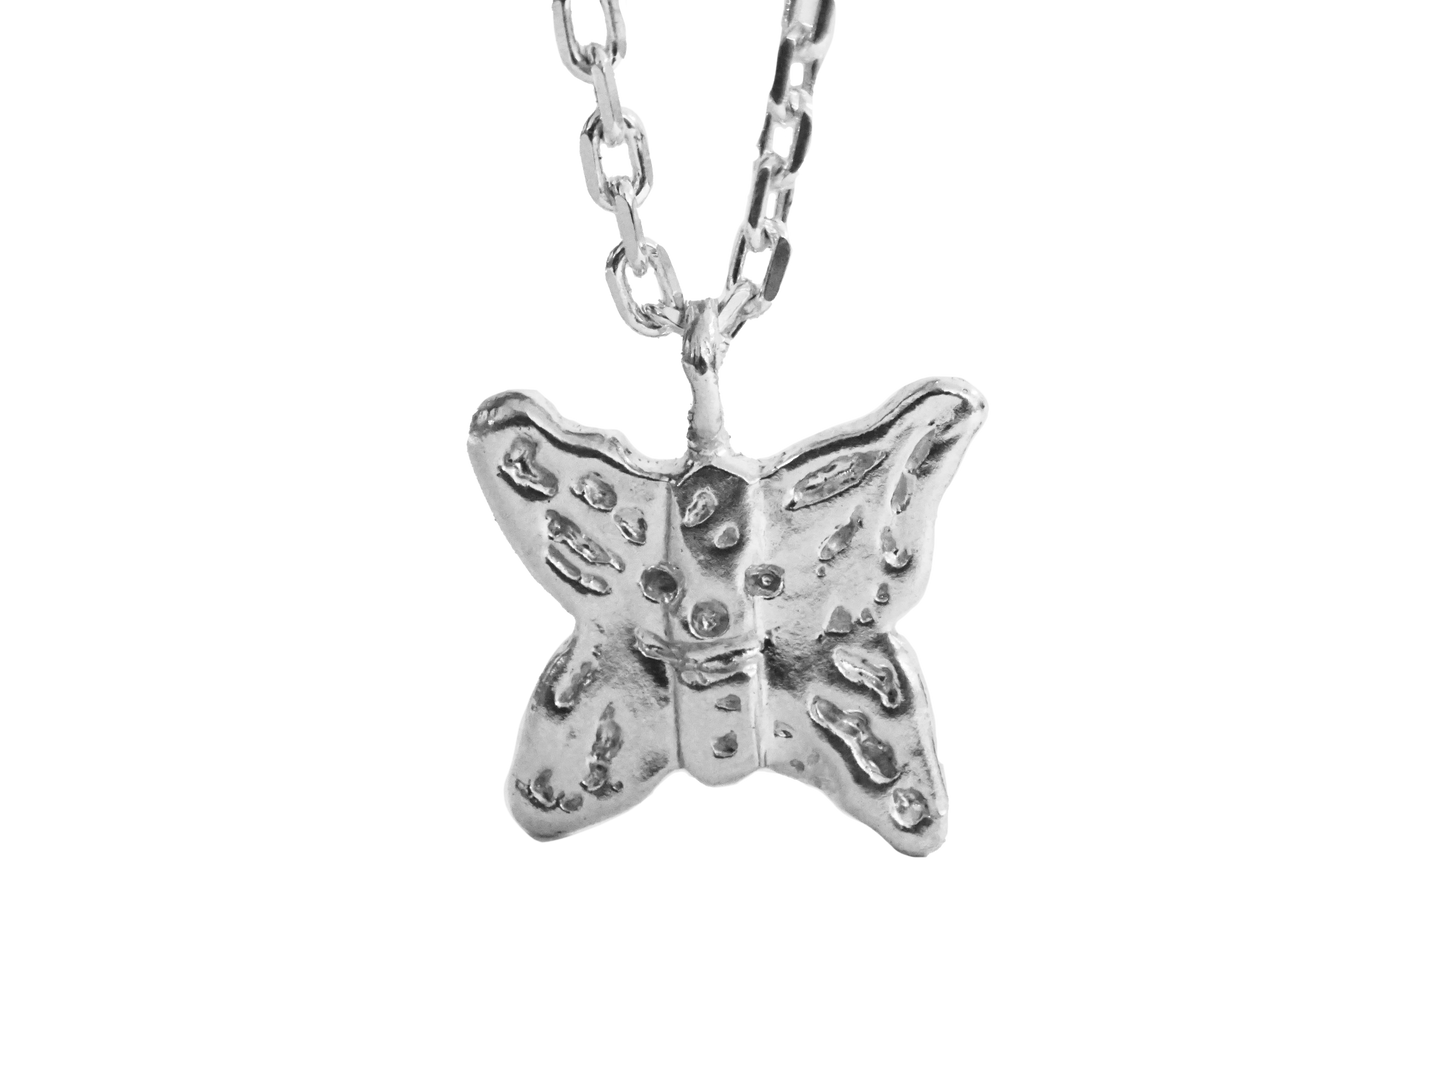 FLOWY BUTTERFLY necklace - Dranem Bag collab